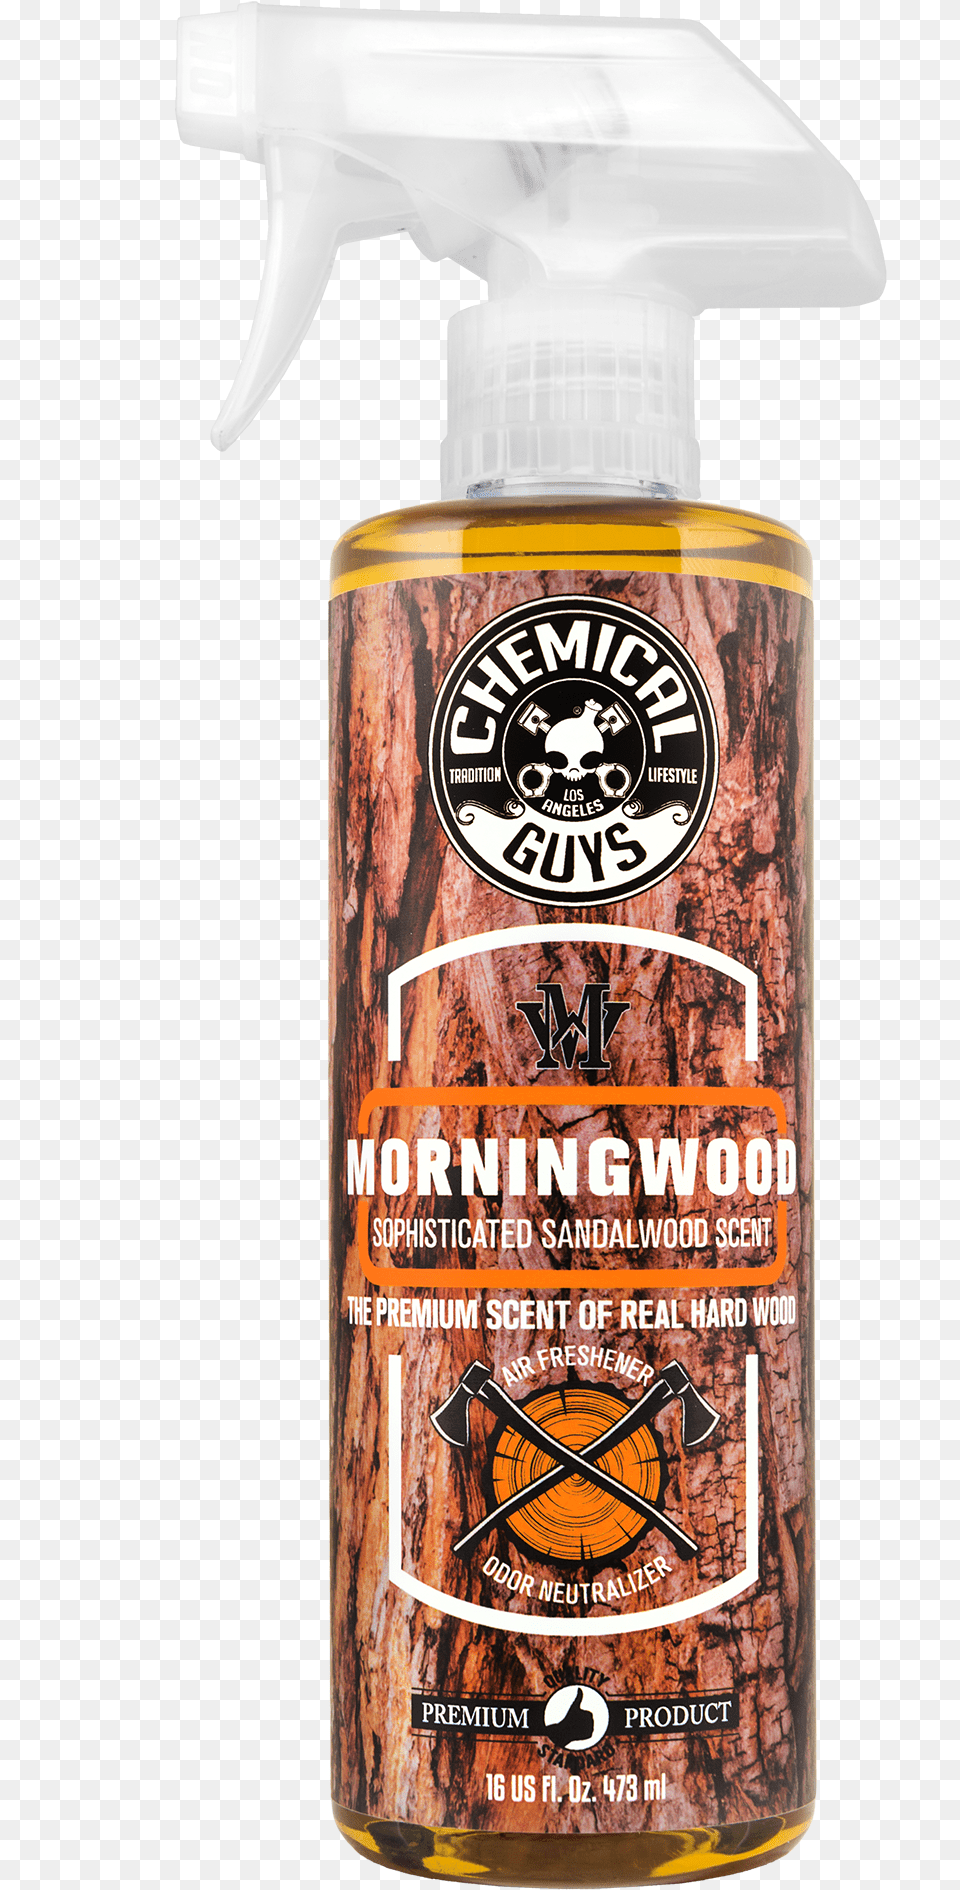 Morning Wood Air Freshener Download Chemical Guys Morning Wood, Bottle, Tin, Can, Axe Png